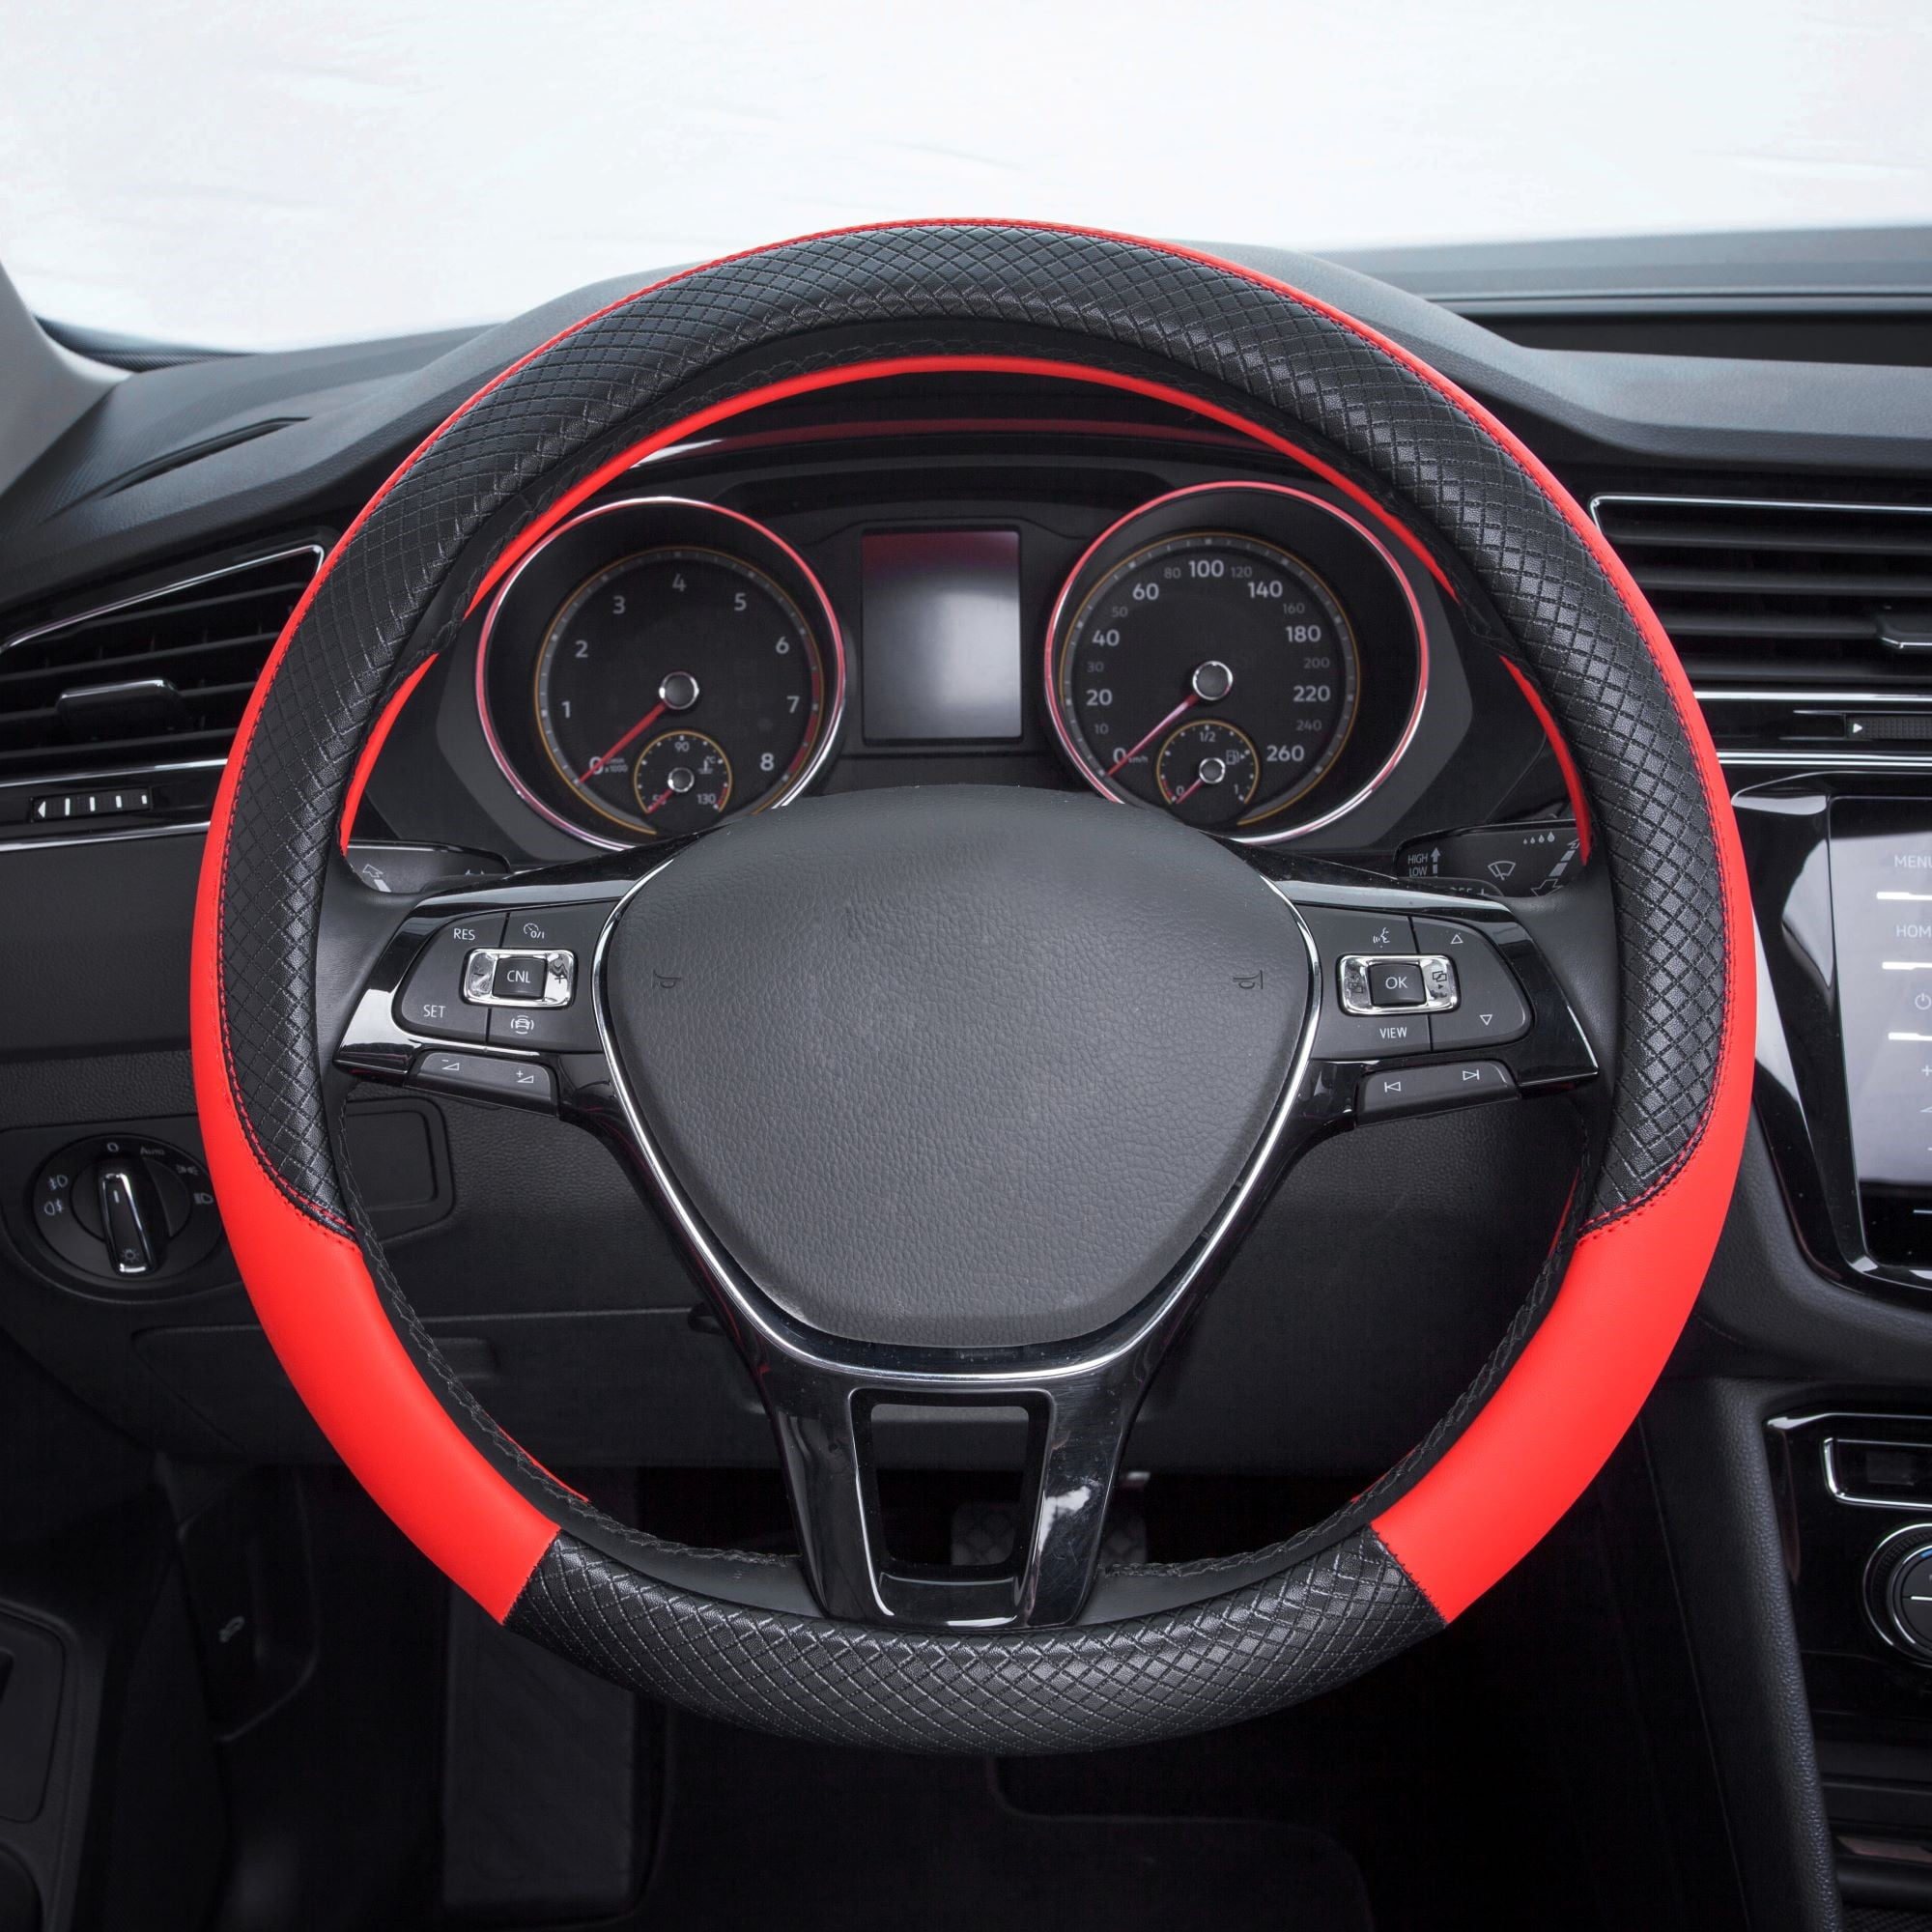 Handmade black & red Steering Wheel Covers anti-wear Leather for Car SUV